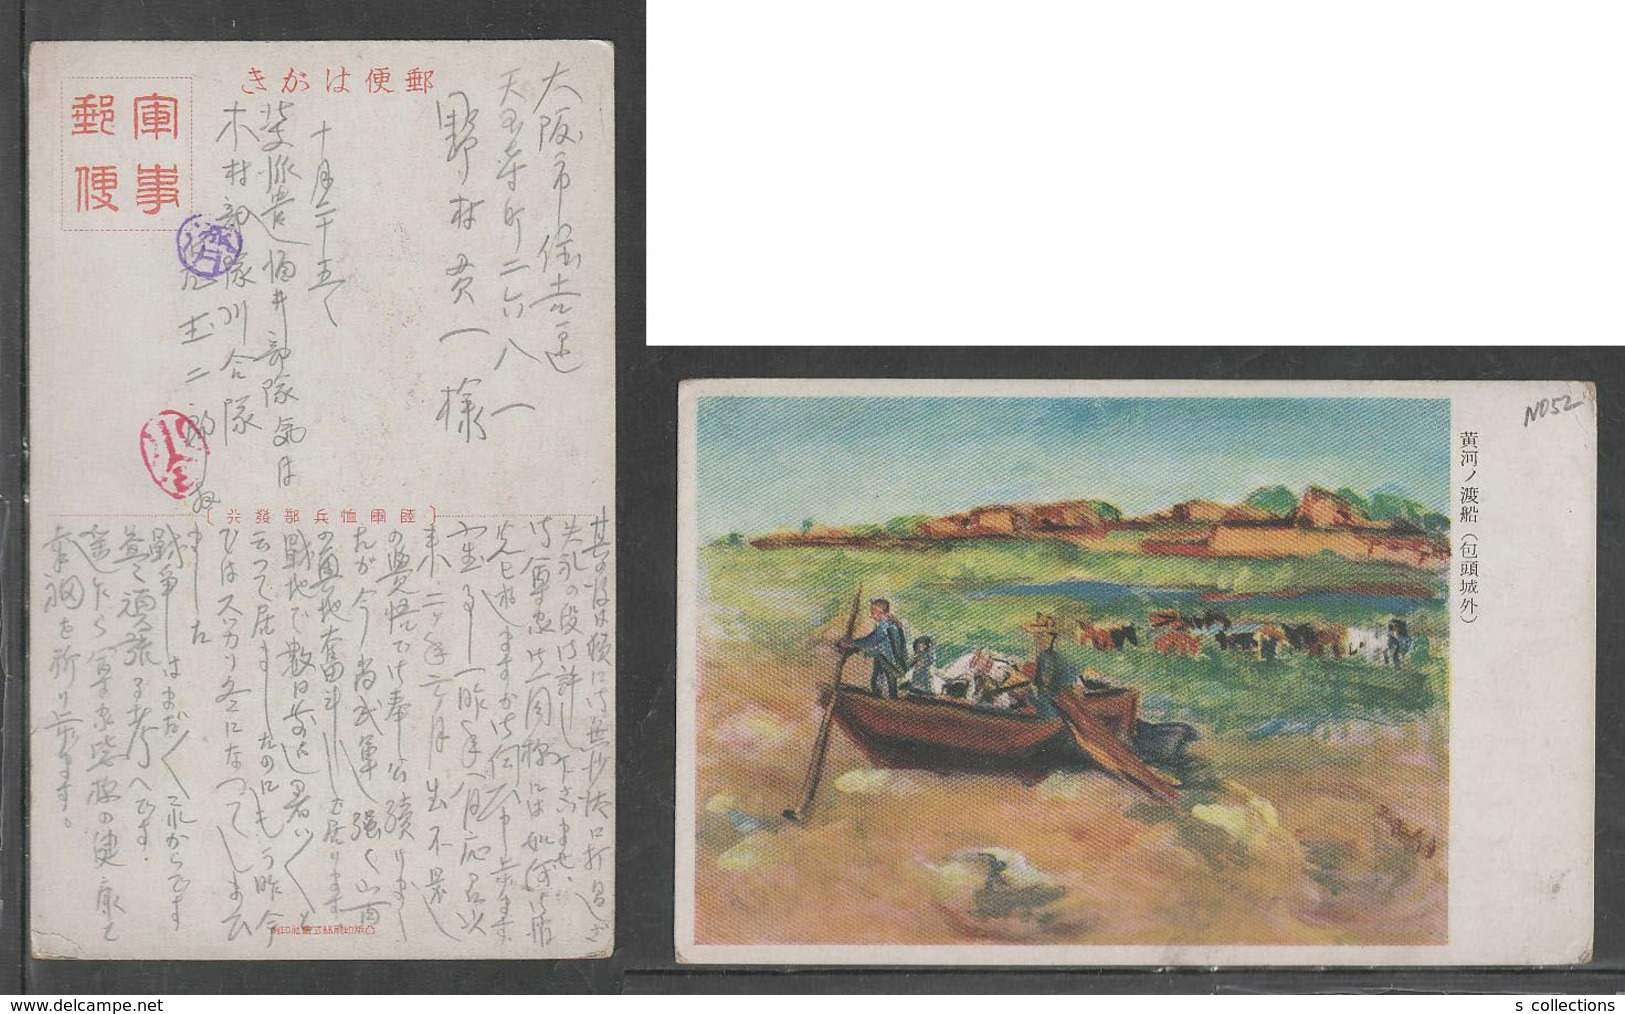 JAPAN WWII Military Yellow River Picture Postcard NORTH CHINA WW2 MANCHURIA CHINE MANDCHOUKOUO JAPON GIAPPONE - 1941-45 Northern China